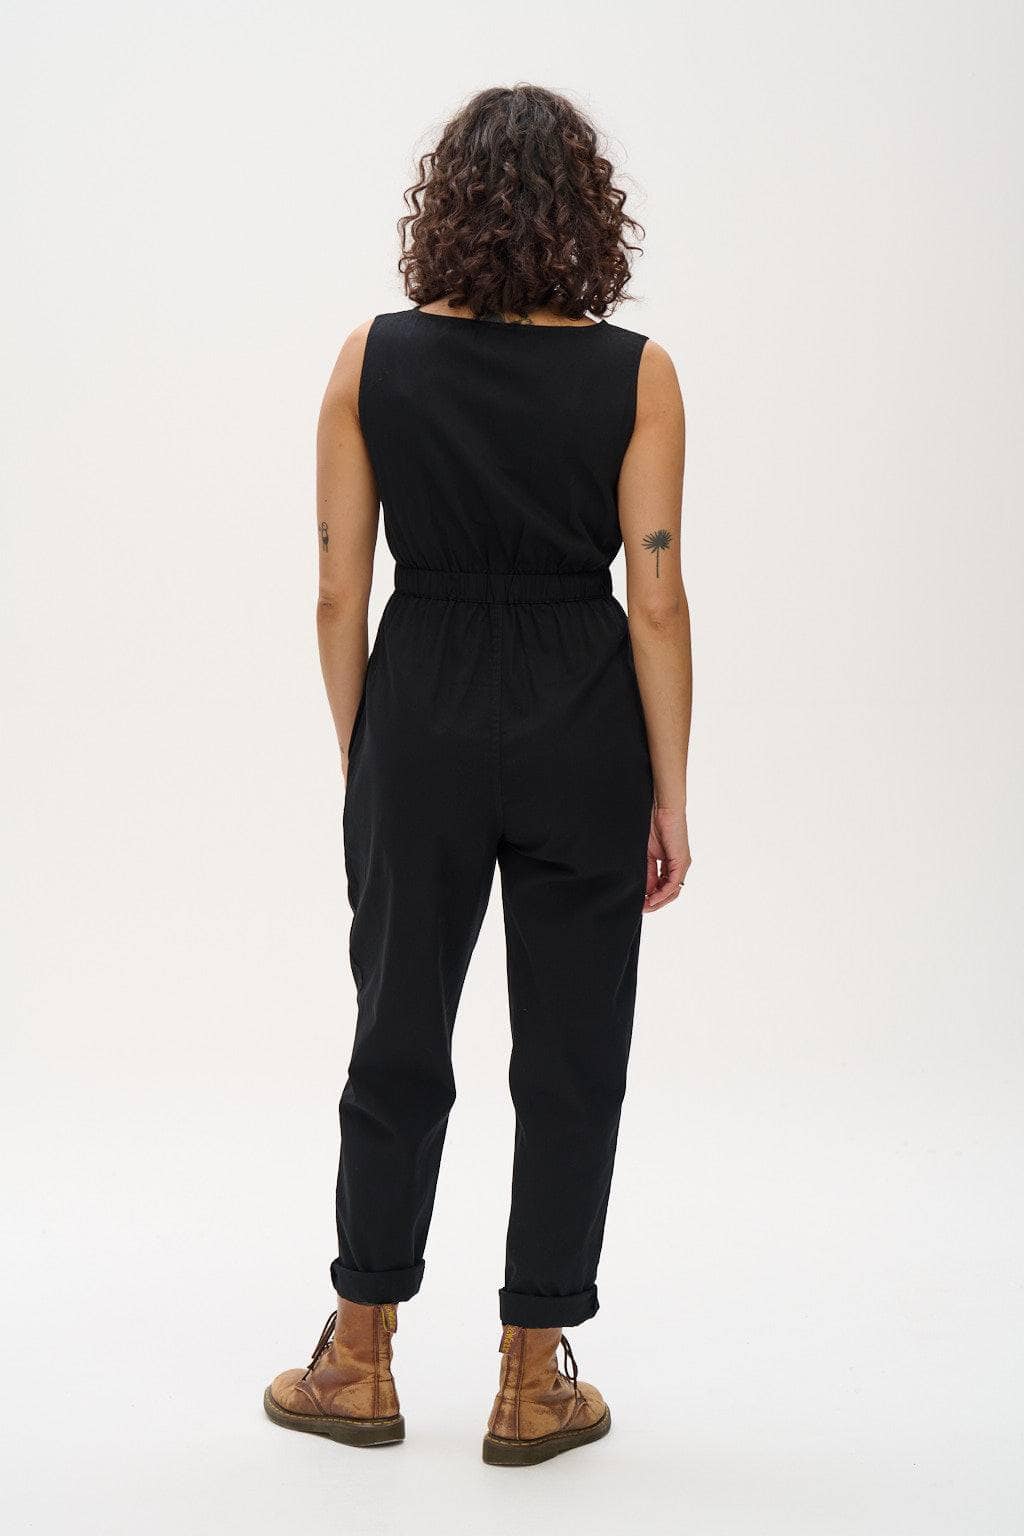 Find The Right Jumpsuit For Your Body Type  Fashion Diary